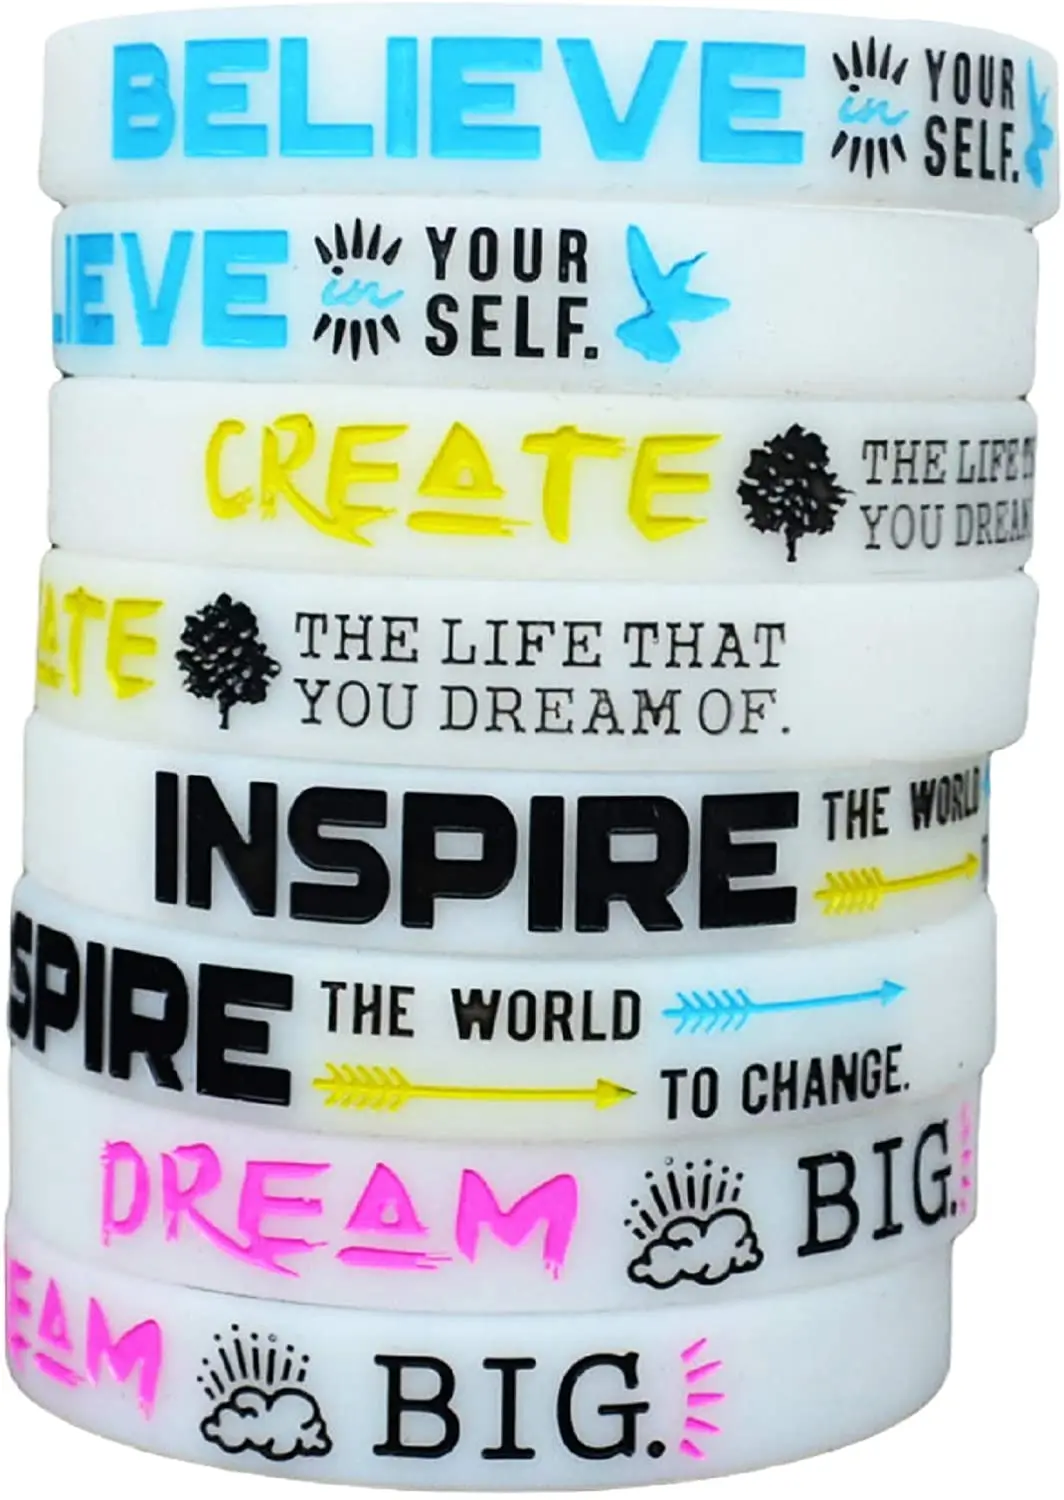 

(12-Pack) Motivational Quote Bracelets Silicone Rubber Wristbands Inspirational Gifts and Party Favors